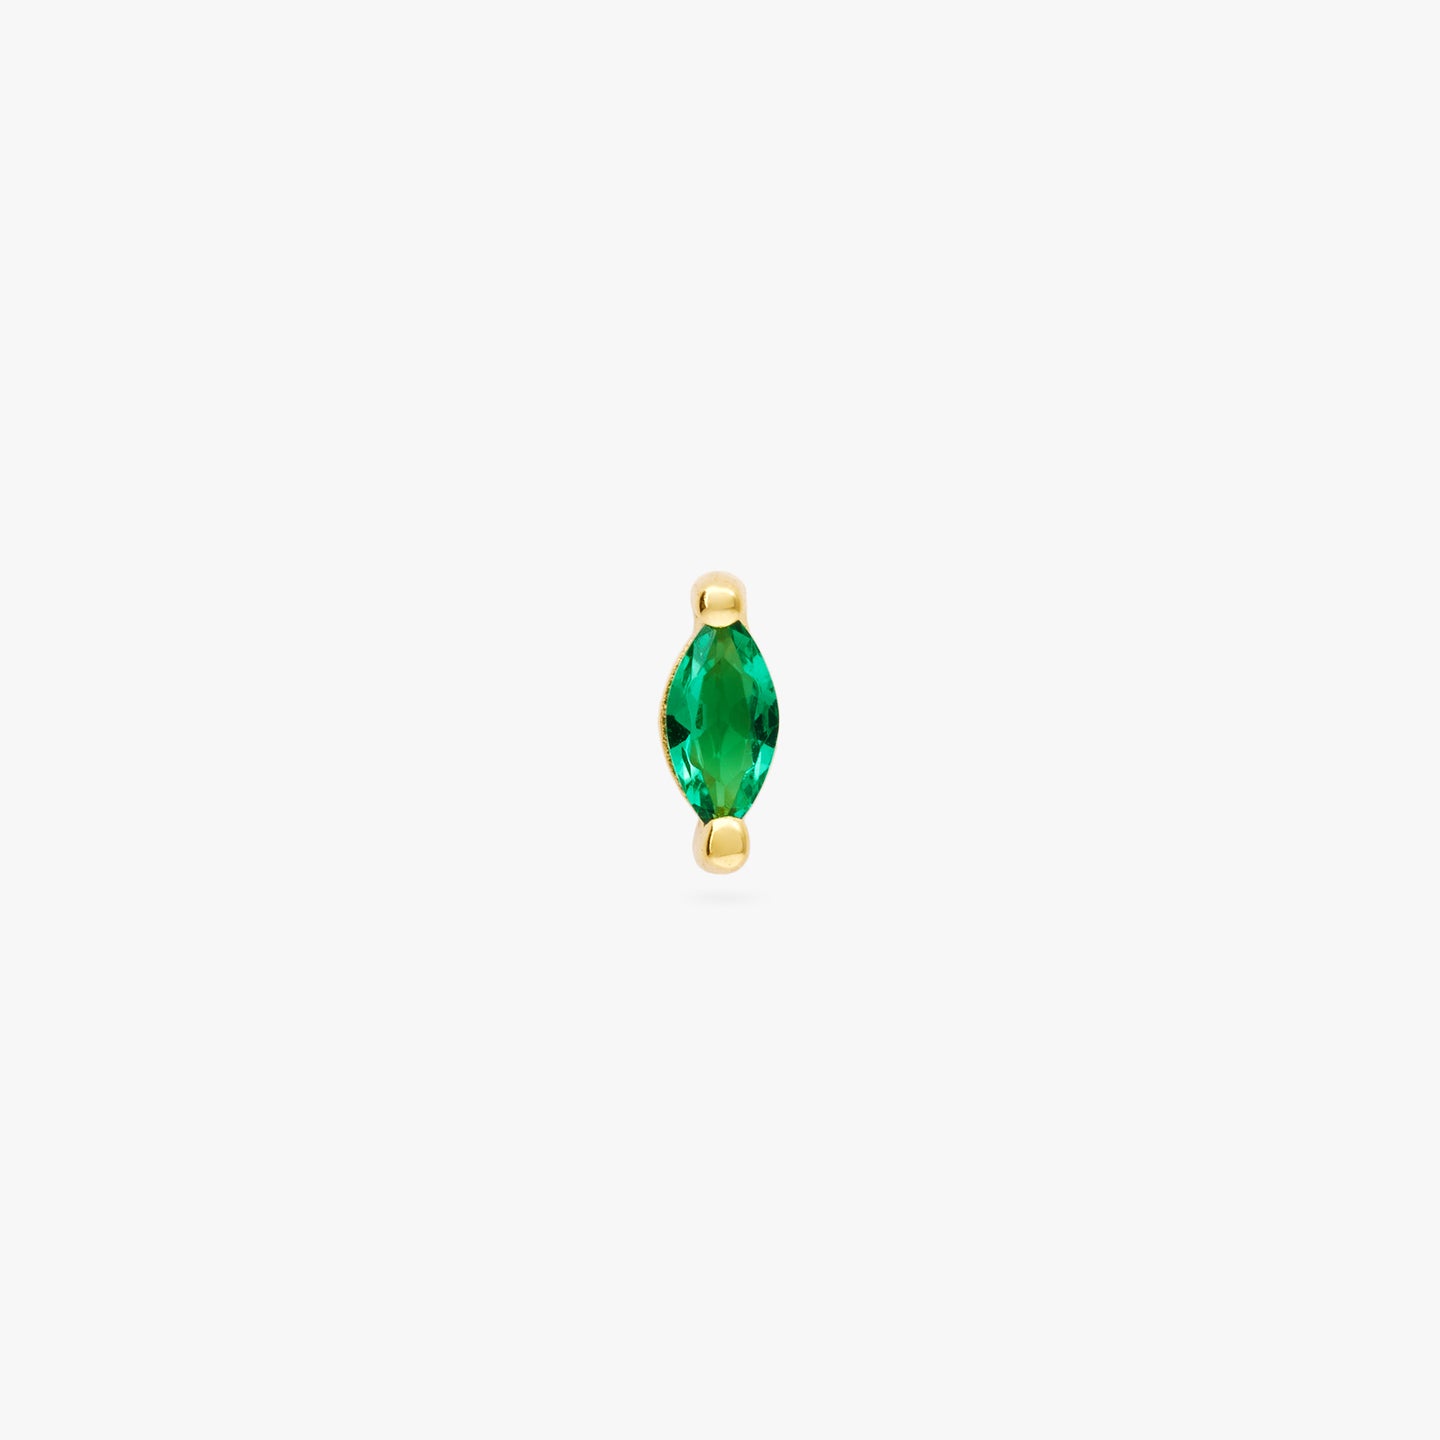 The marquise mini stud features a green oblong shaped gem and has gold accents color:null|gold/green